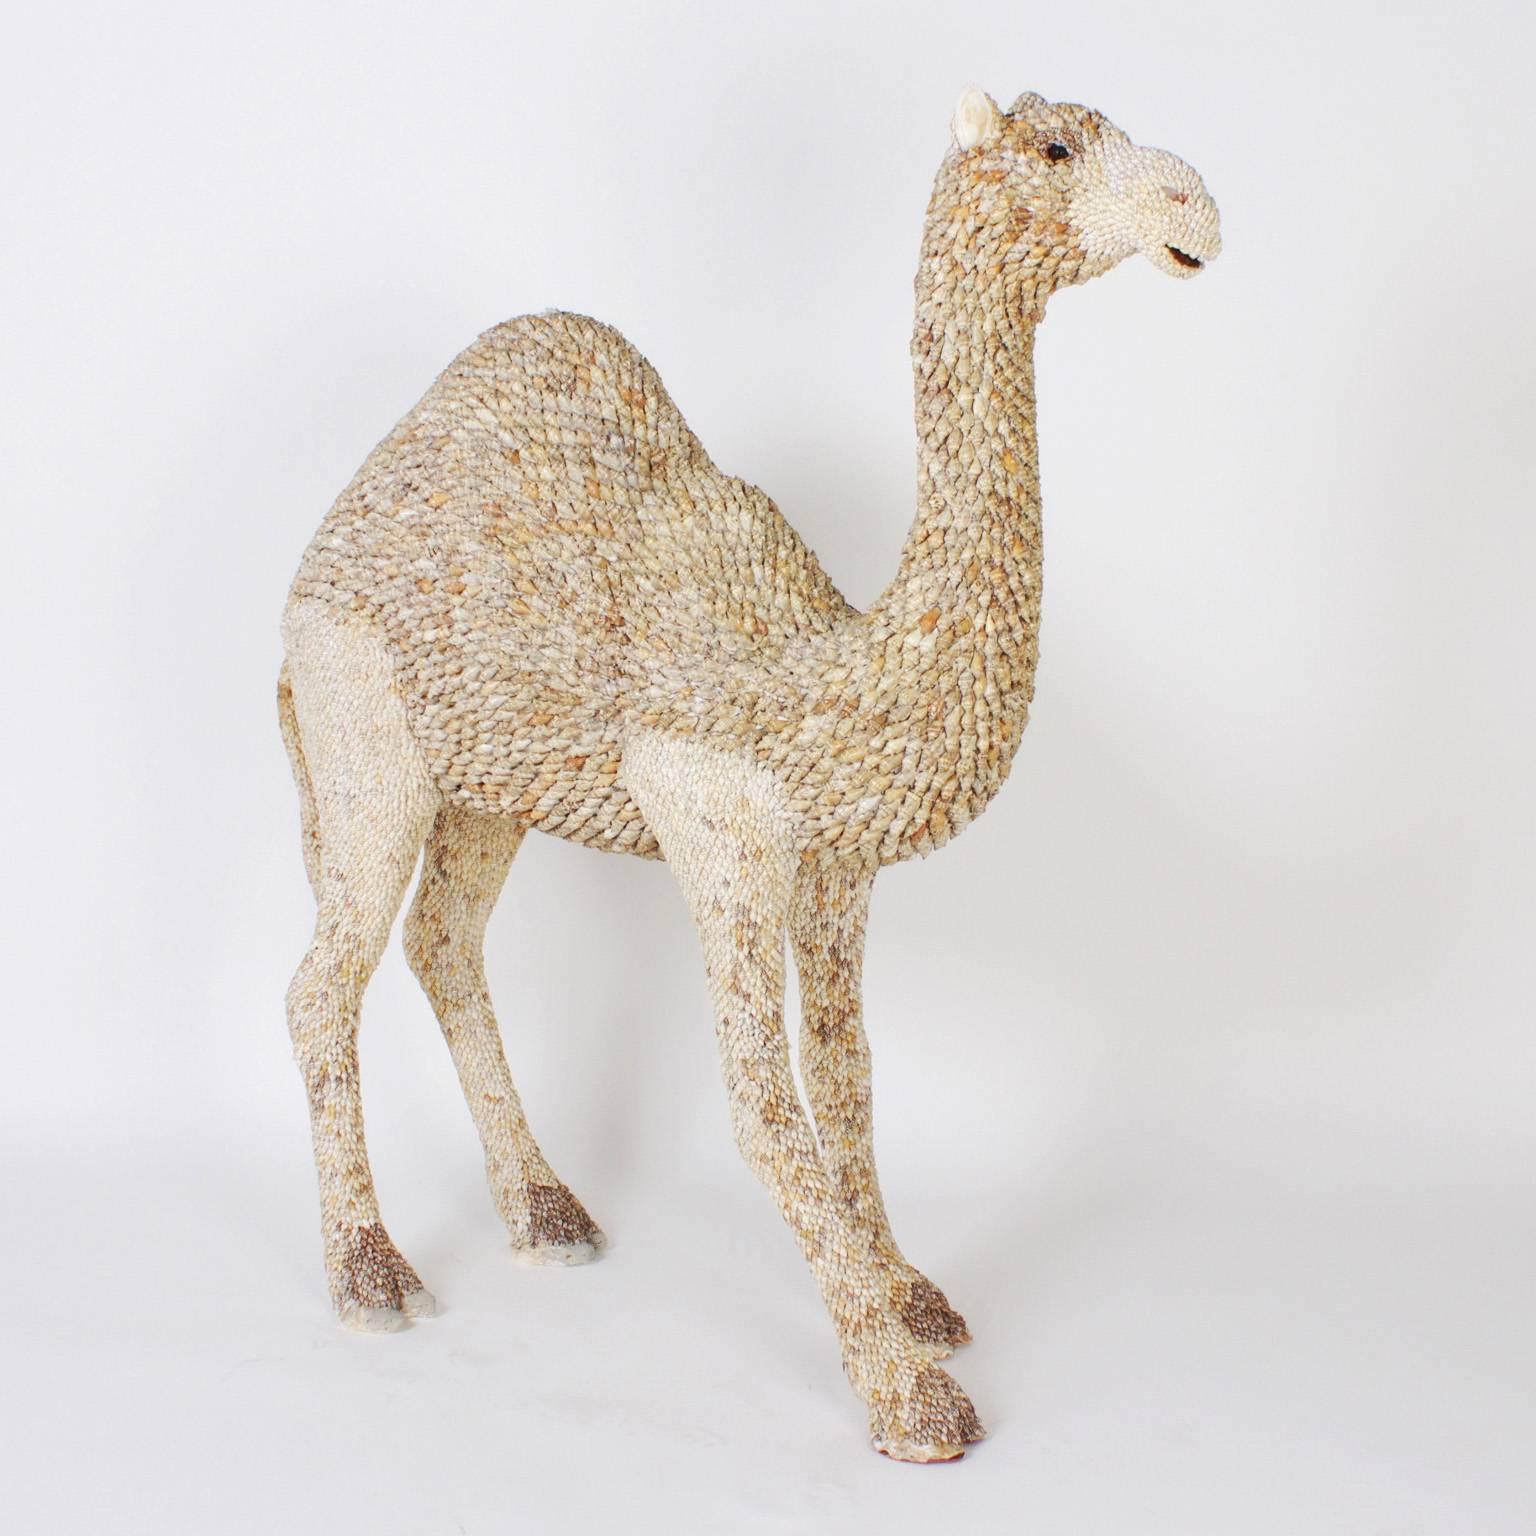 A sculpture of a lifesize young camel entirely encrusted with seashells by a fanciful and ambitious hand. From the soulful expression to the proud stance this is a perfect combination of craft, vision and whimsy. Attributed to Antony Redmile.